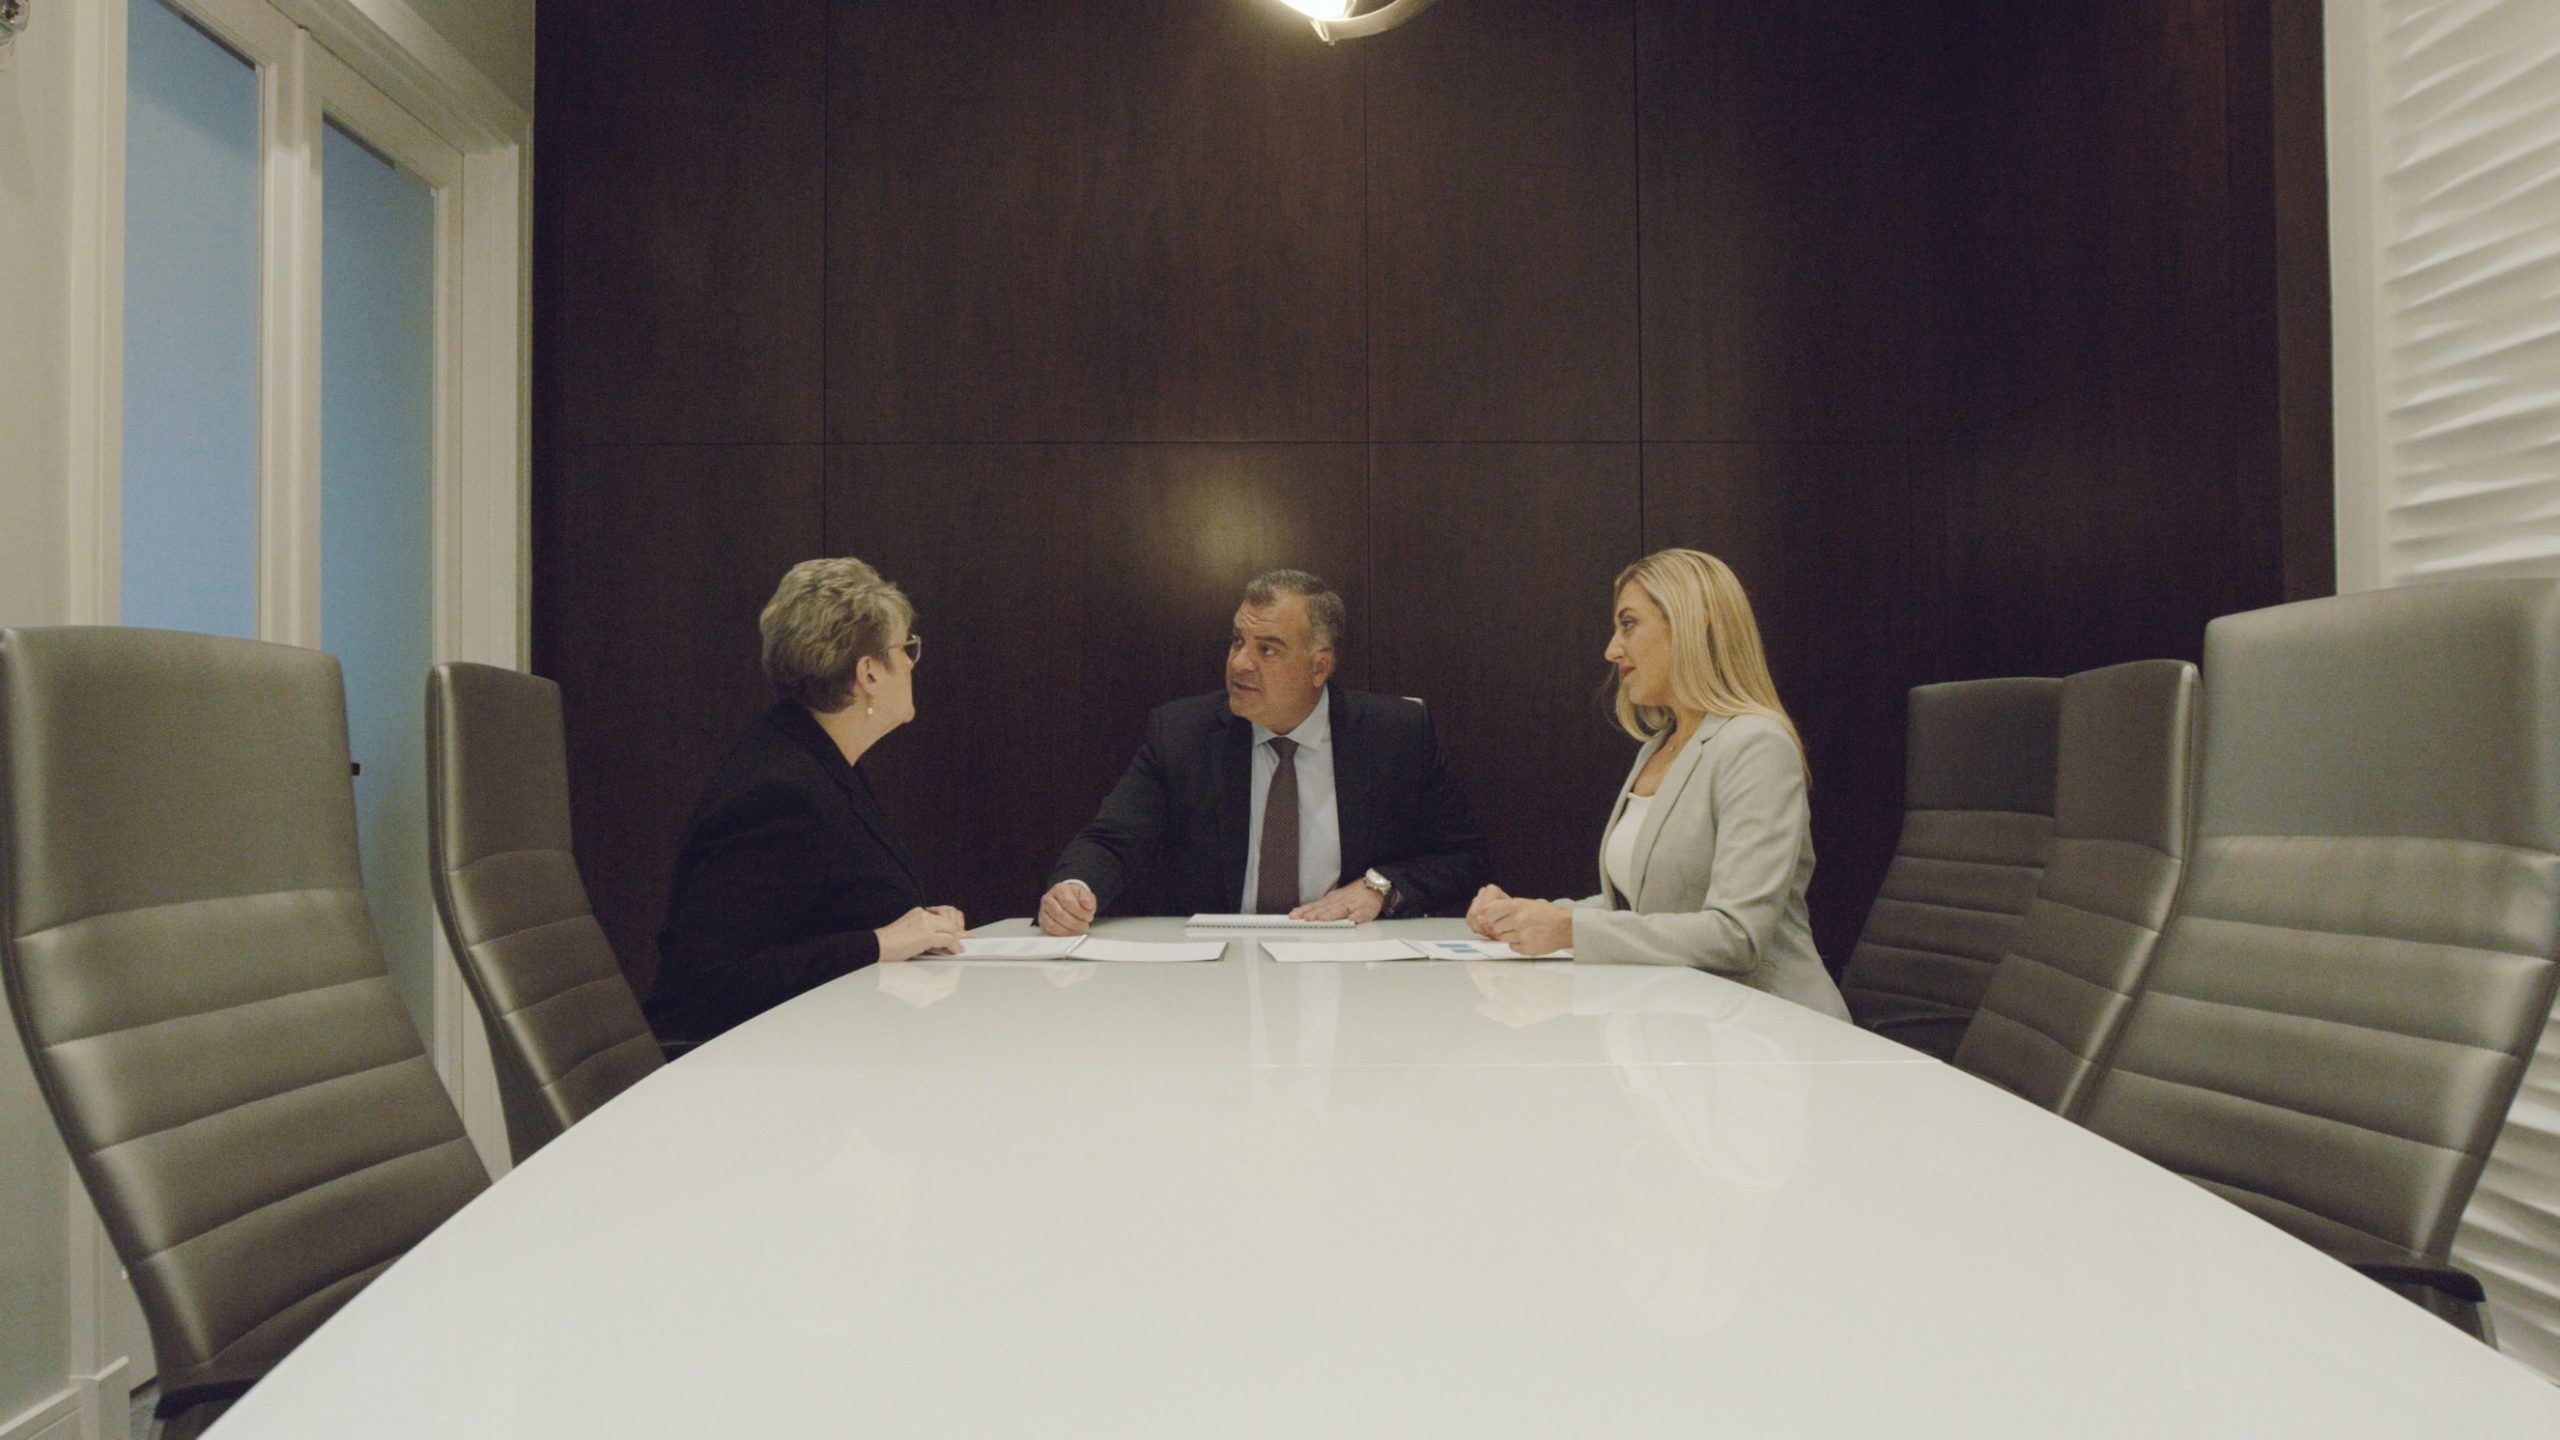 Hightower Financial Advisors A man and two women gathered at an office table having a discussion